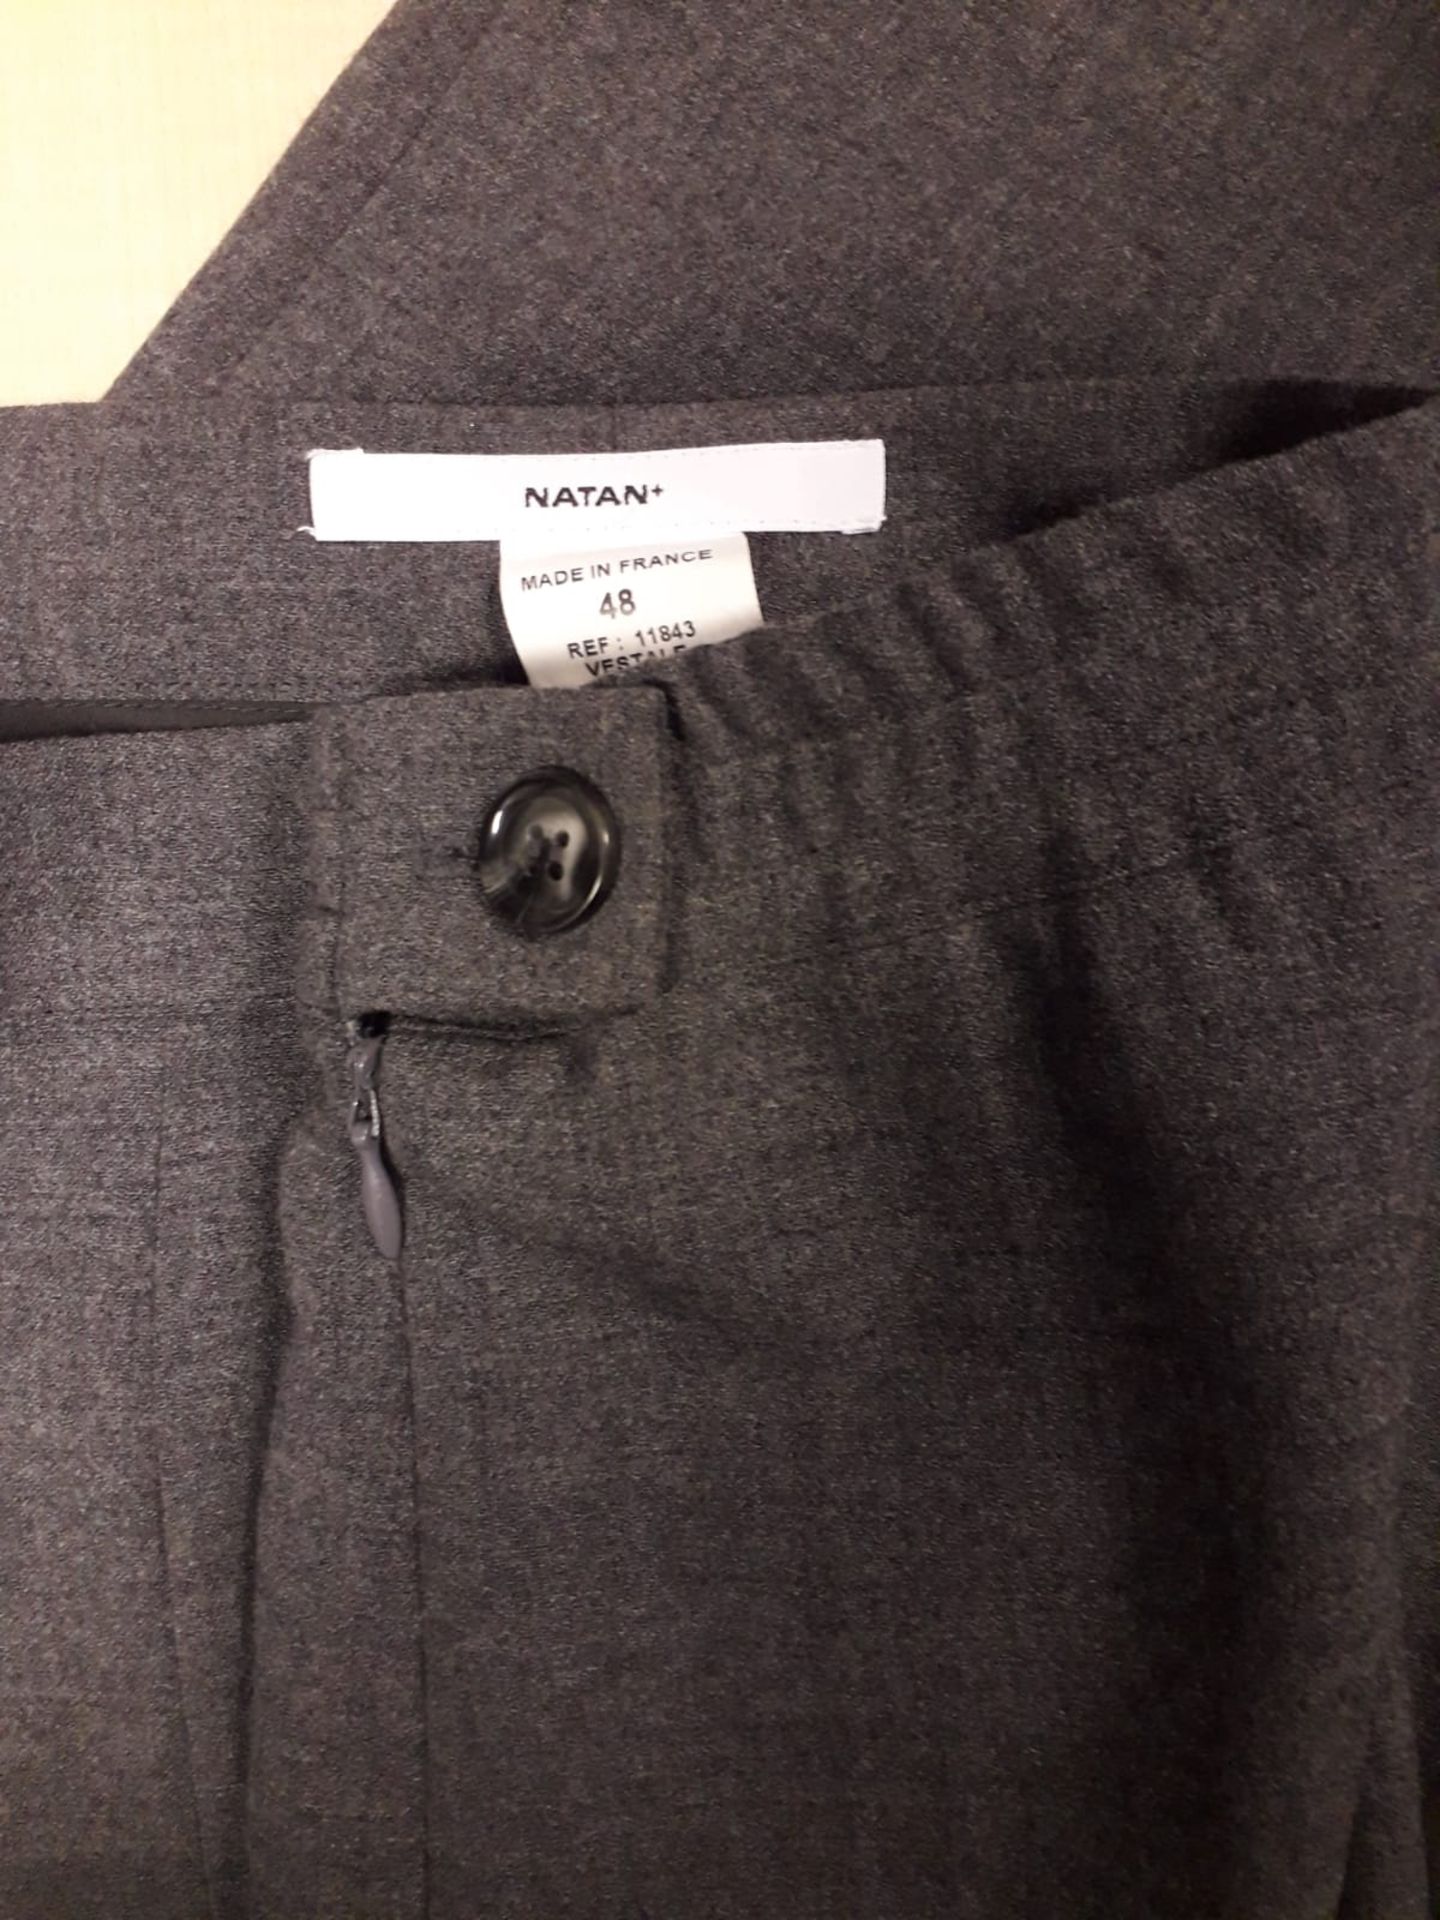 1 x Natan Plus Grey Trousers - Size: 48 - Material: 96% Virgin Wool, 4% Elastane - From a High End - Image 3 of 5